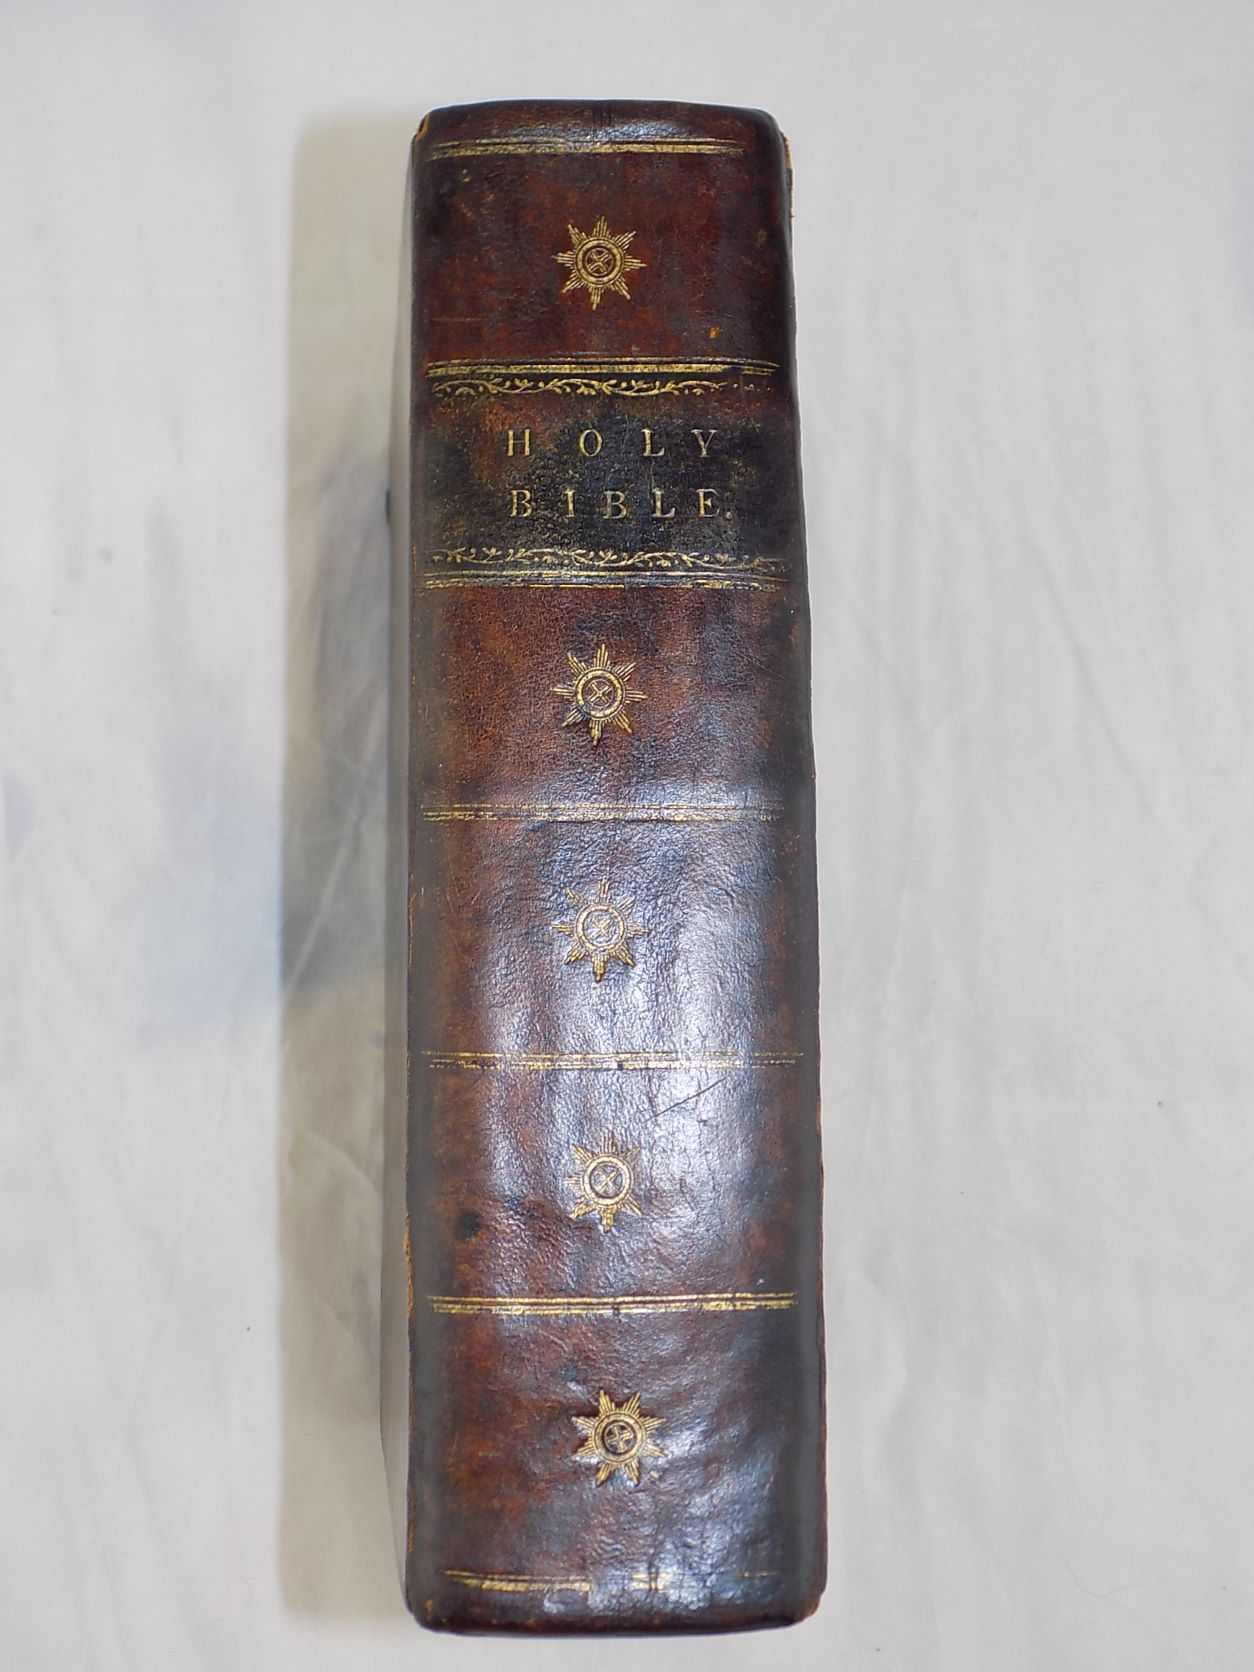 1675 oxford king james bible first edition